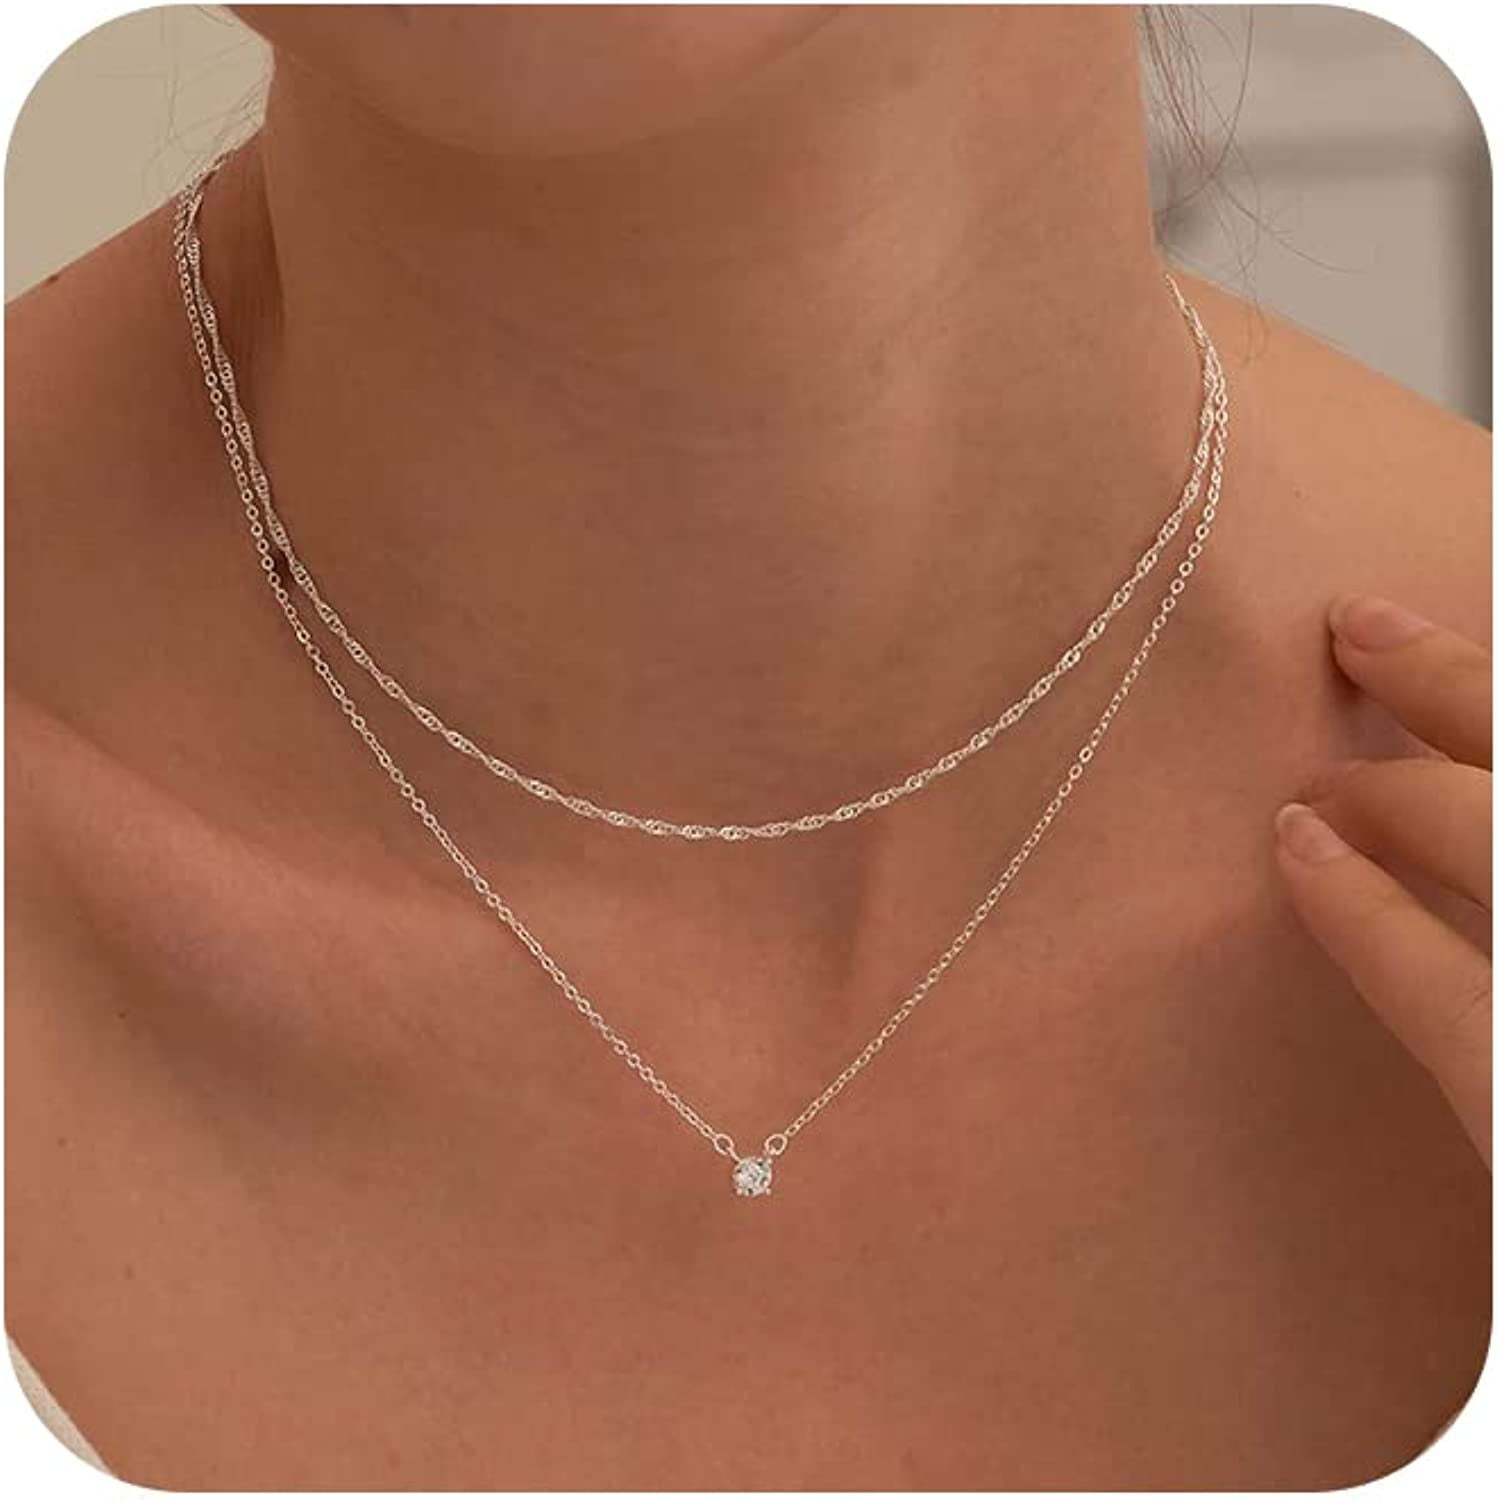 Kailis White Gold Negligee Pearl Necklace - Fine Jewellery and Argyle Pink  Diamond Specialists